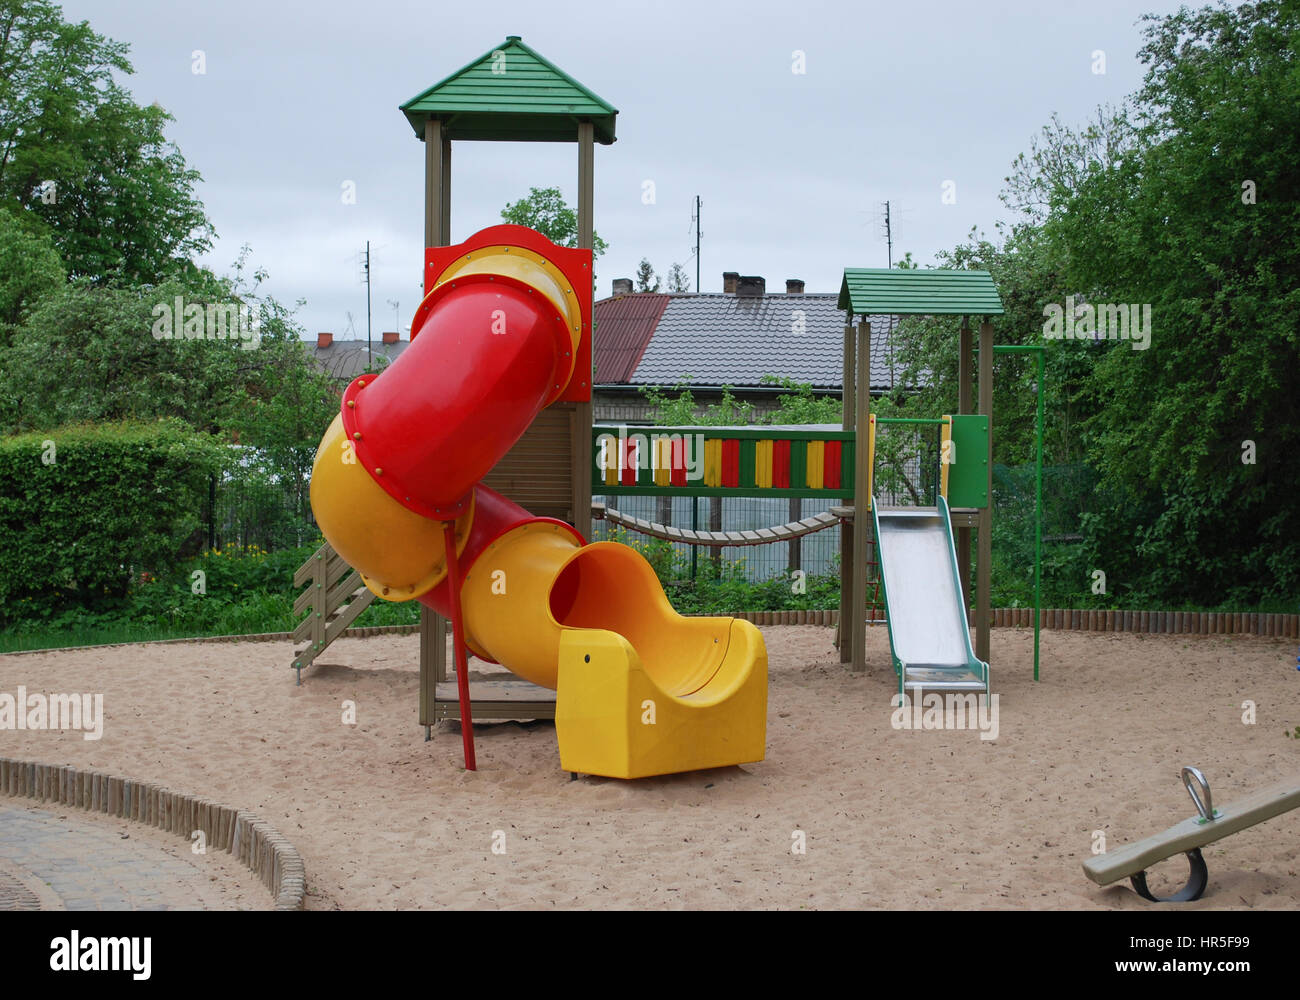 Playground Colors  Playground Equipment Color Options